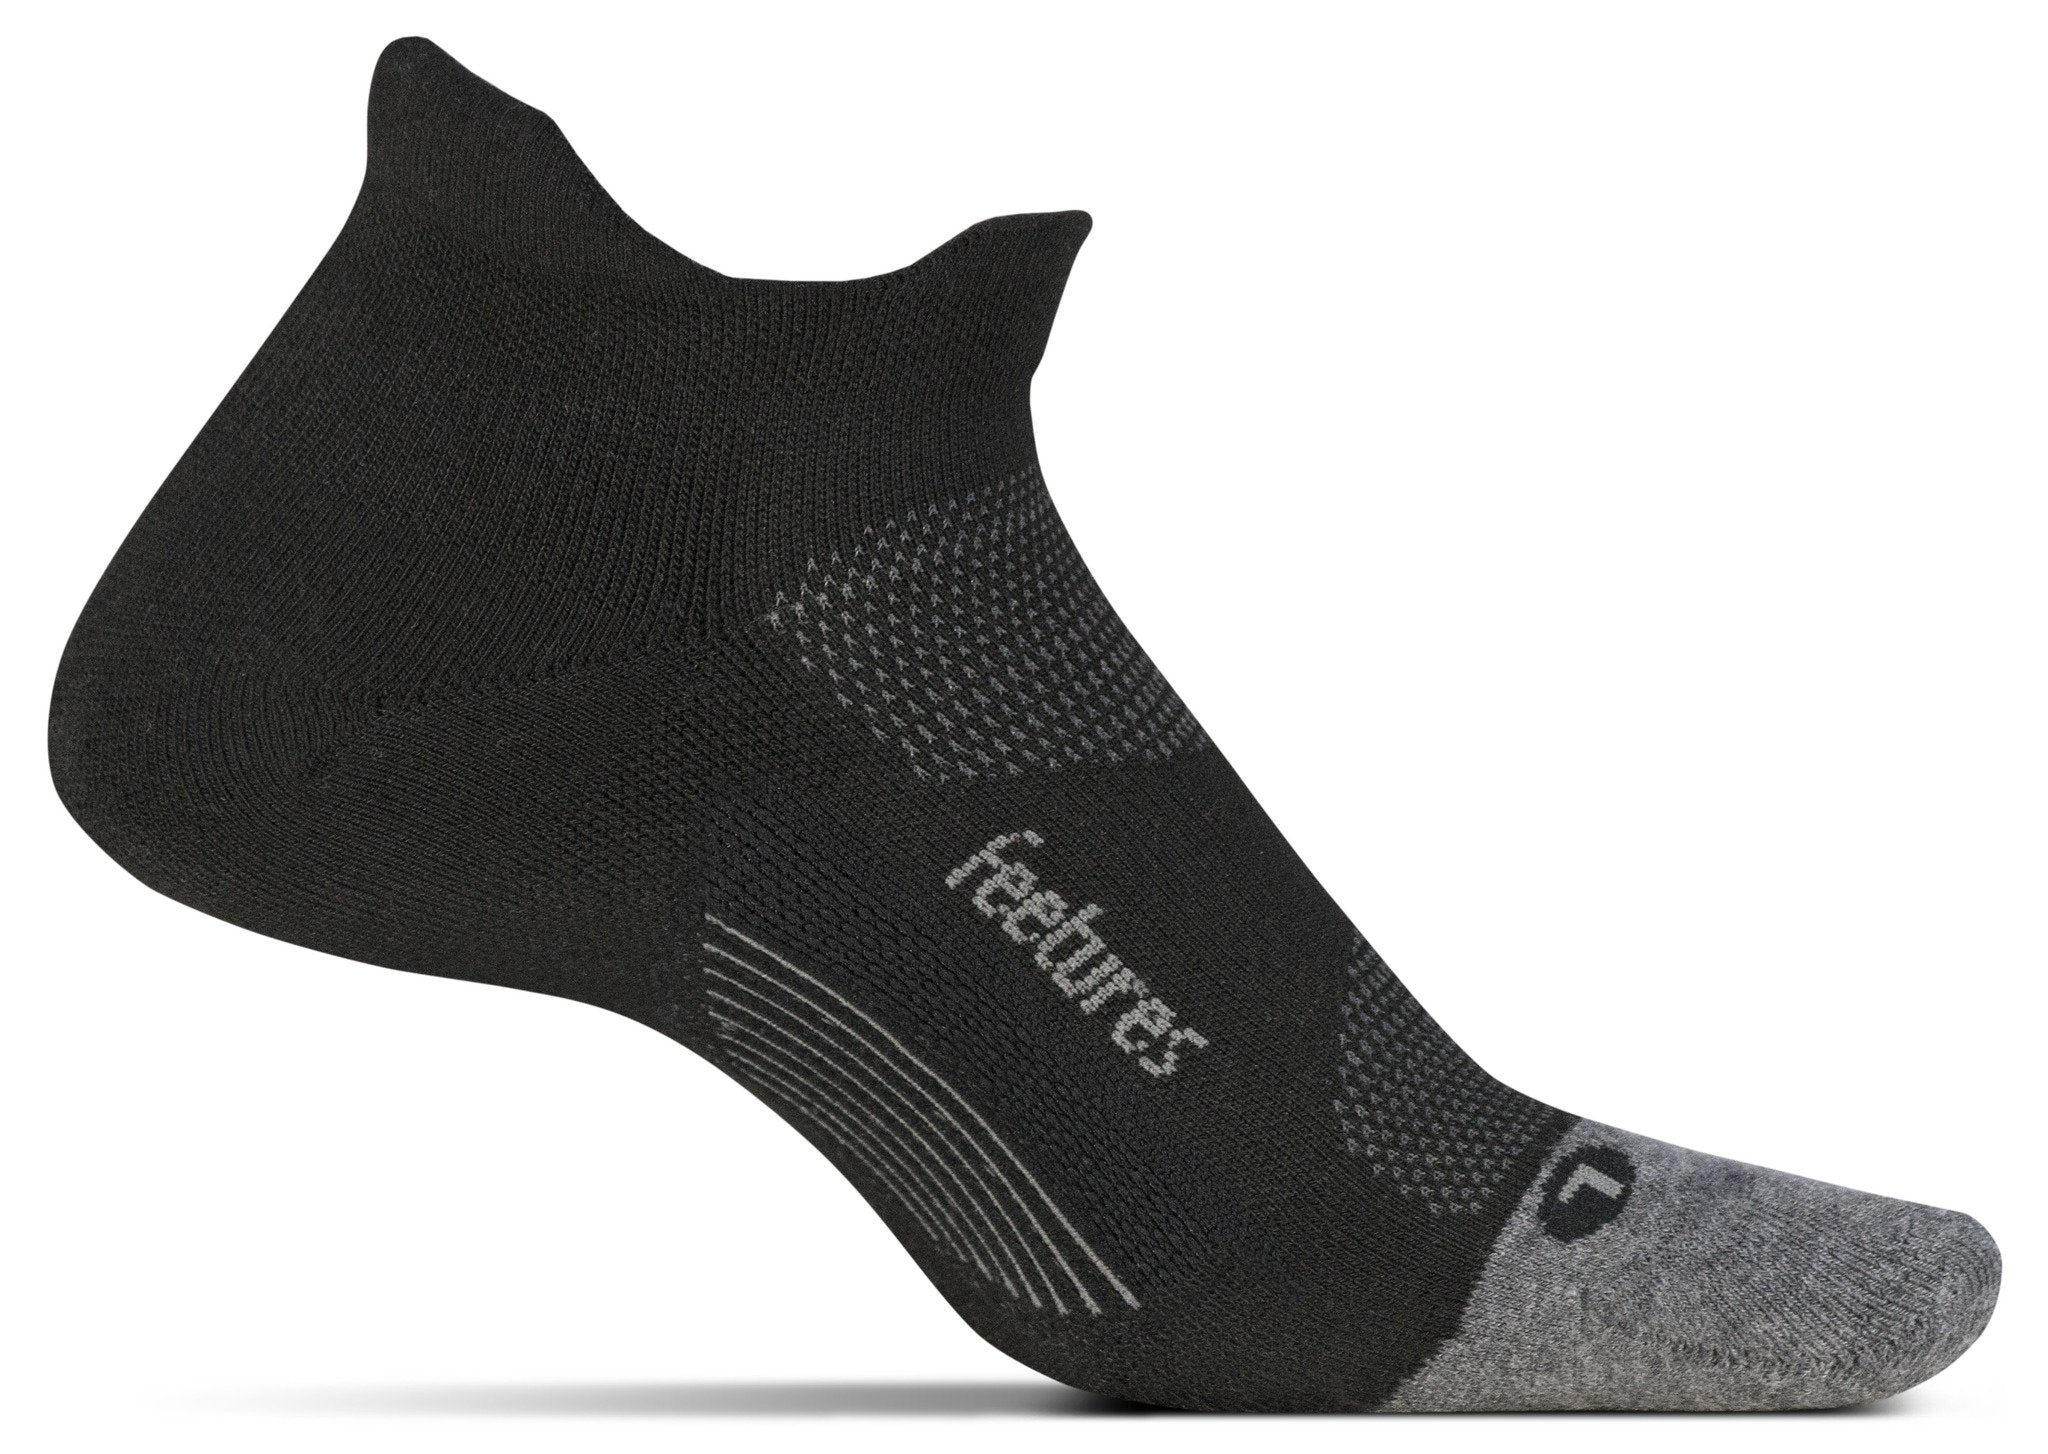 A medial view of the Feetures Elite Max Cushion running sock (left foot) in the color black.